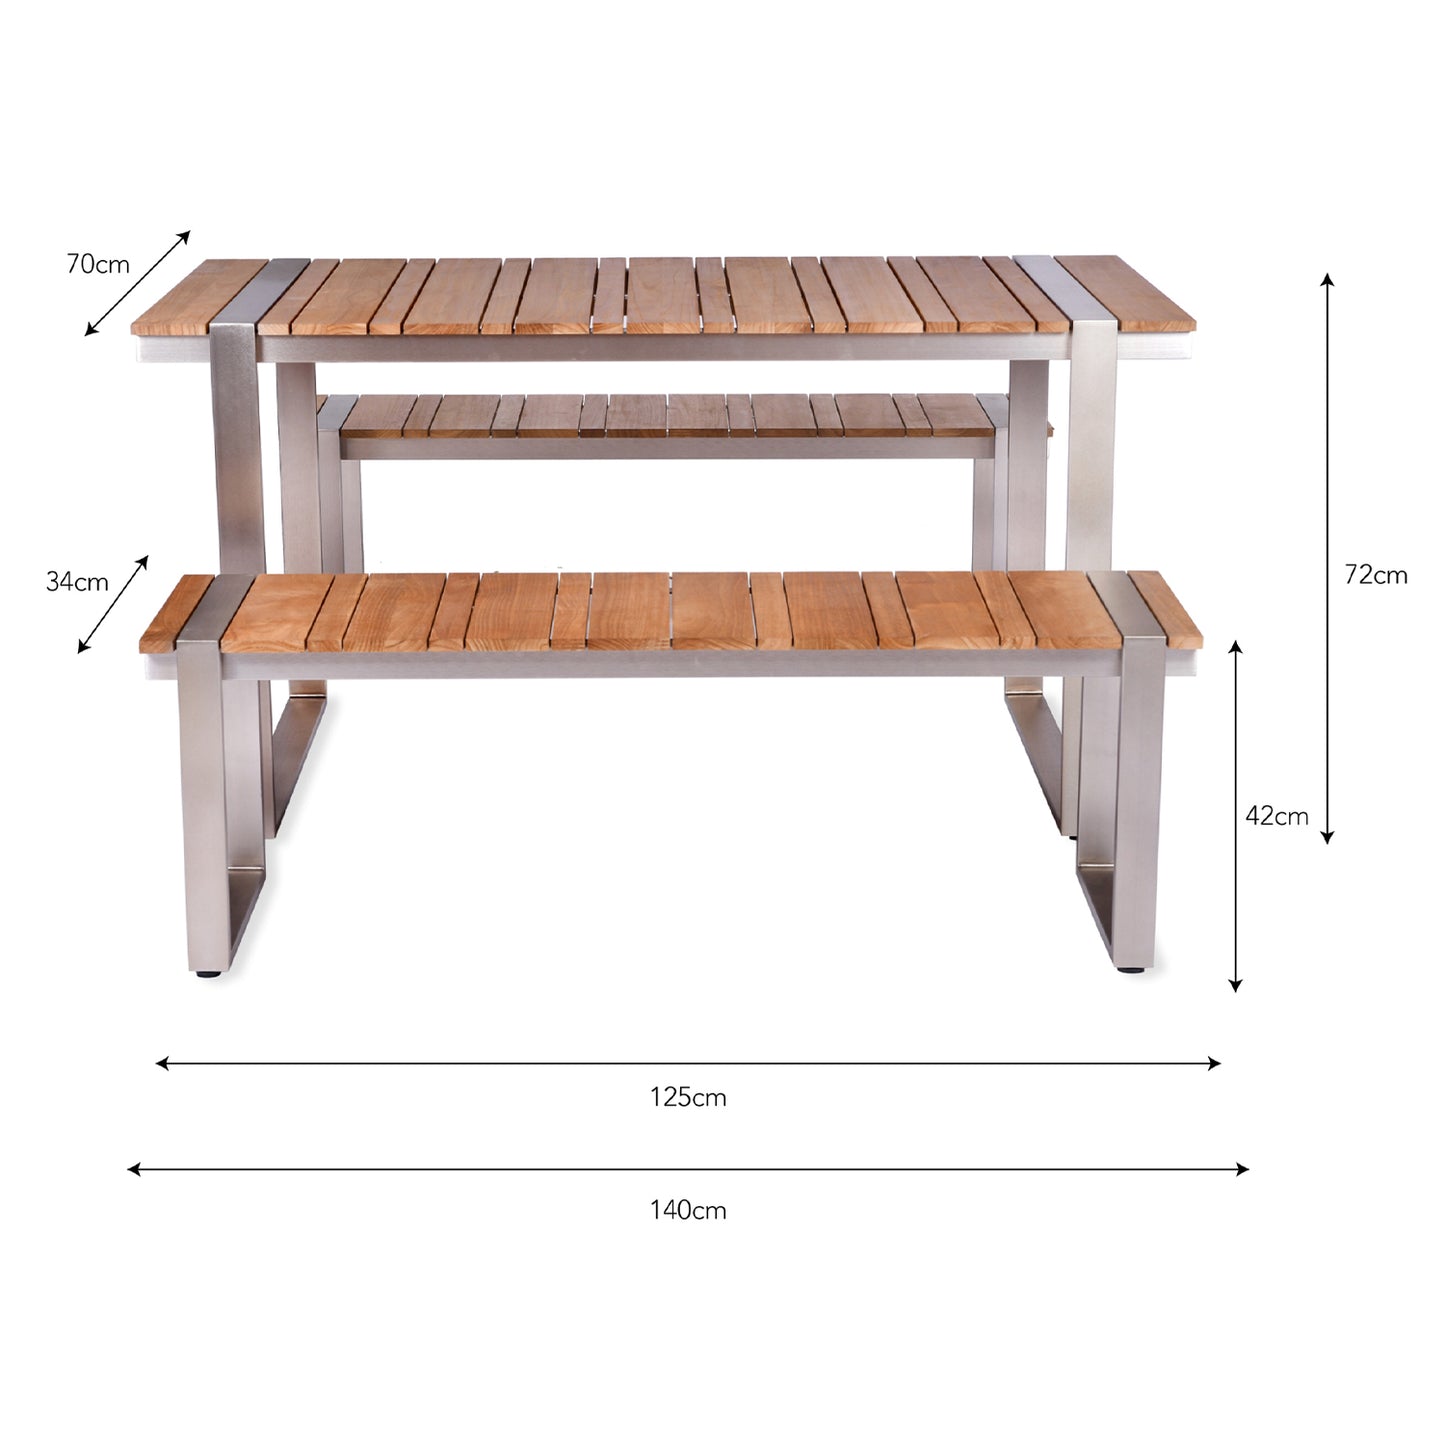 Trewithian Outdoor Table and Bench Set Teak by Garden Trading